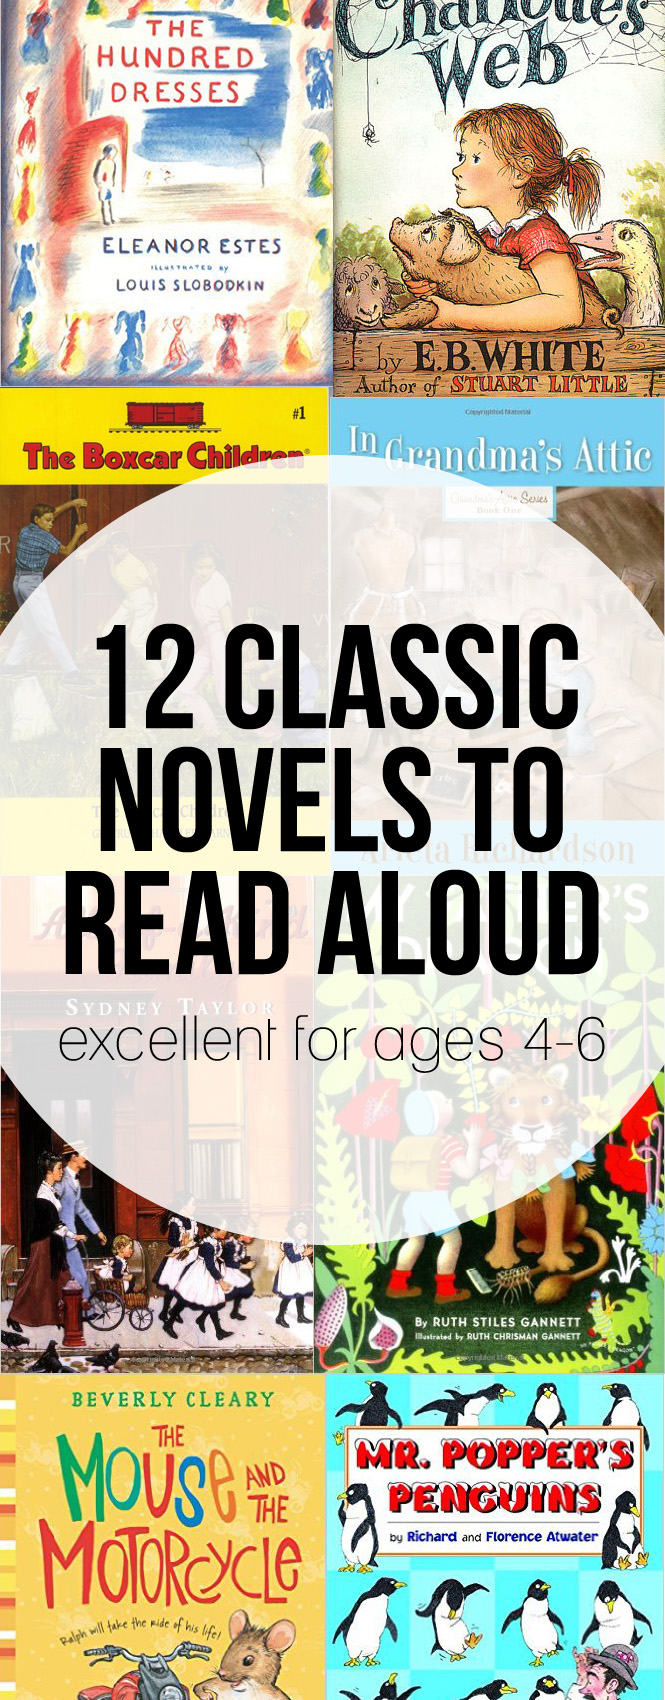 Classic Novels for Kindergarten (and those aged 4-6).